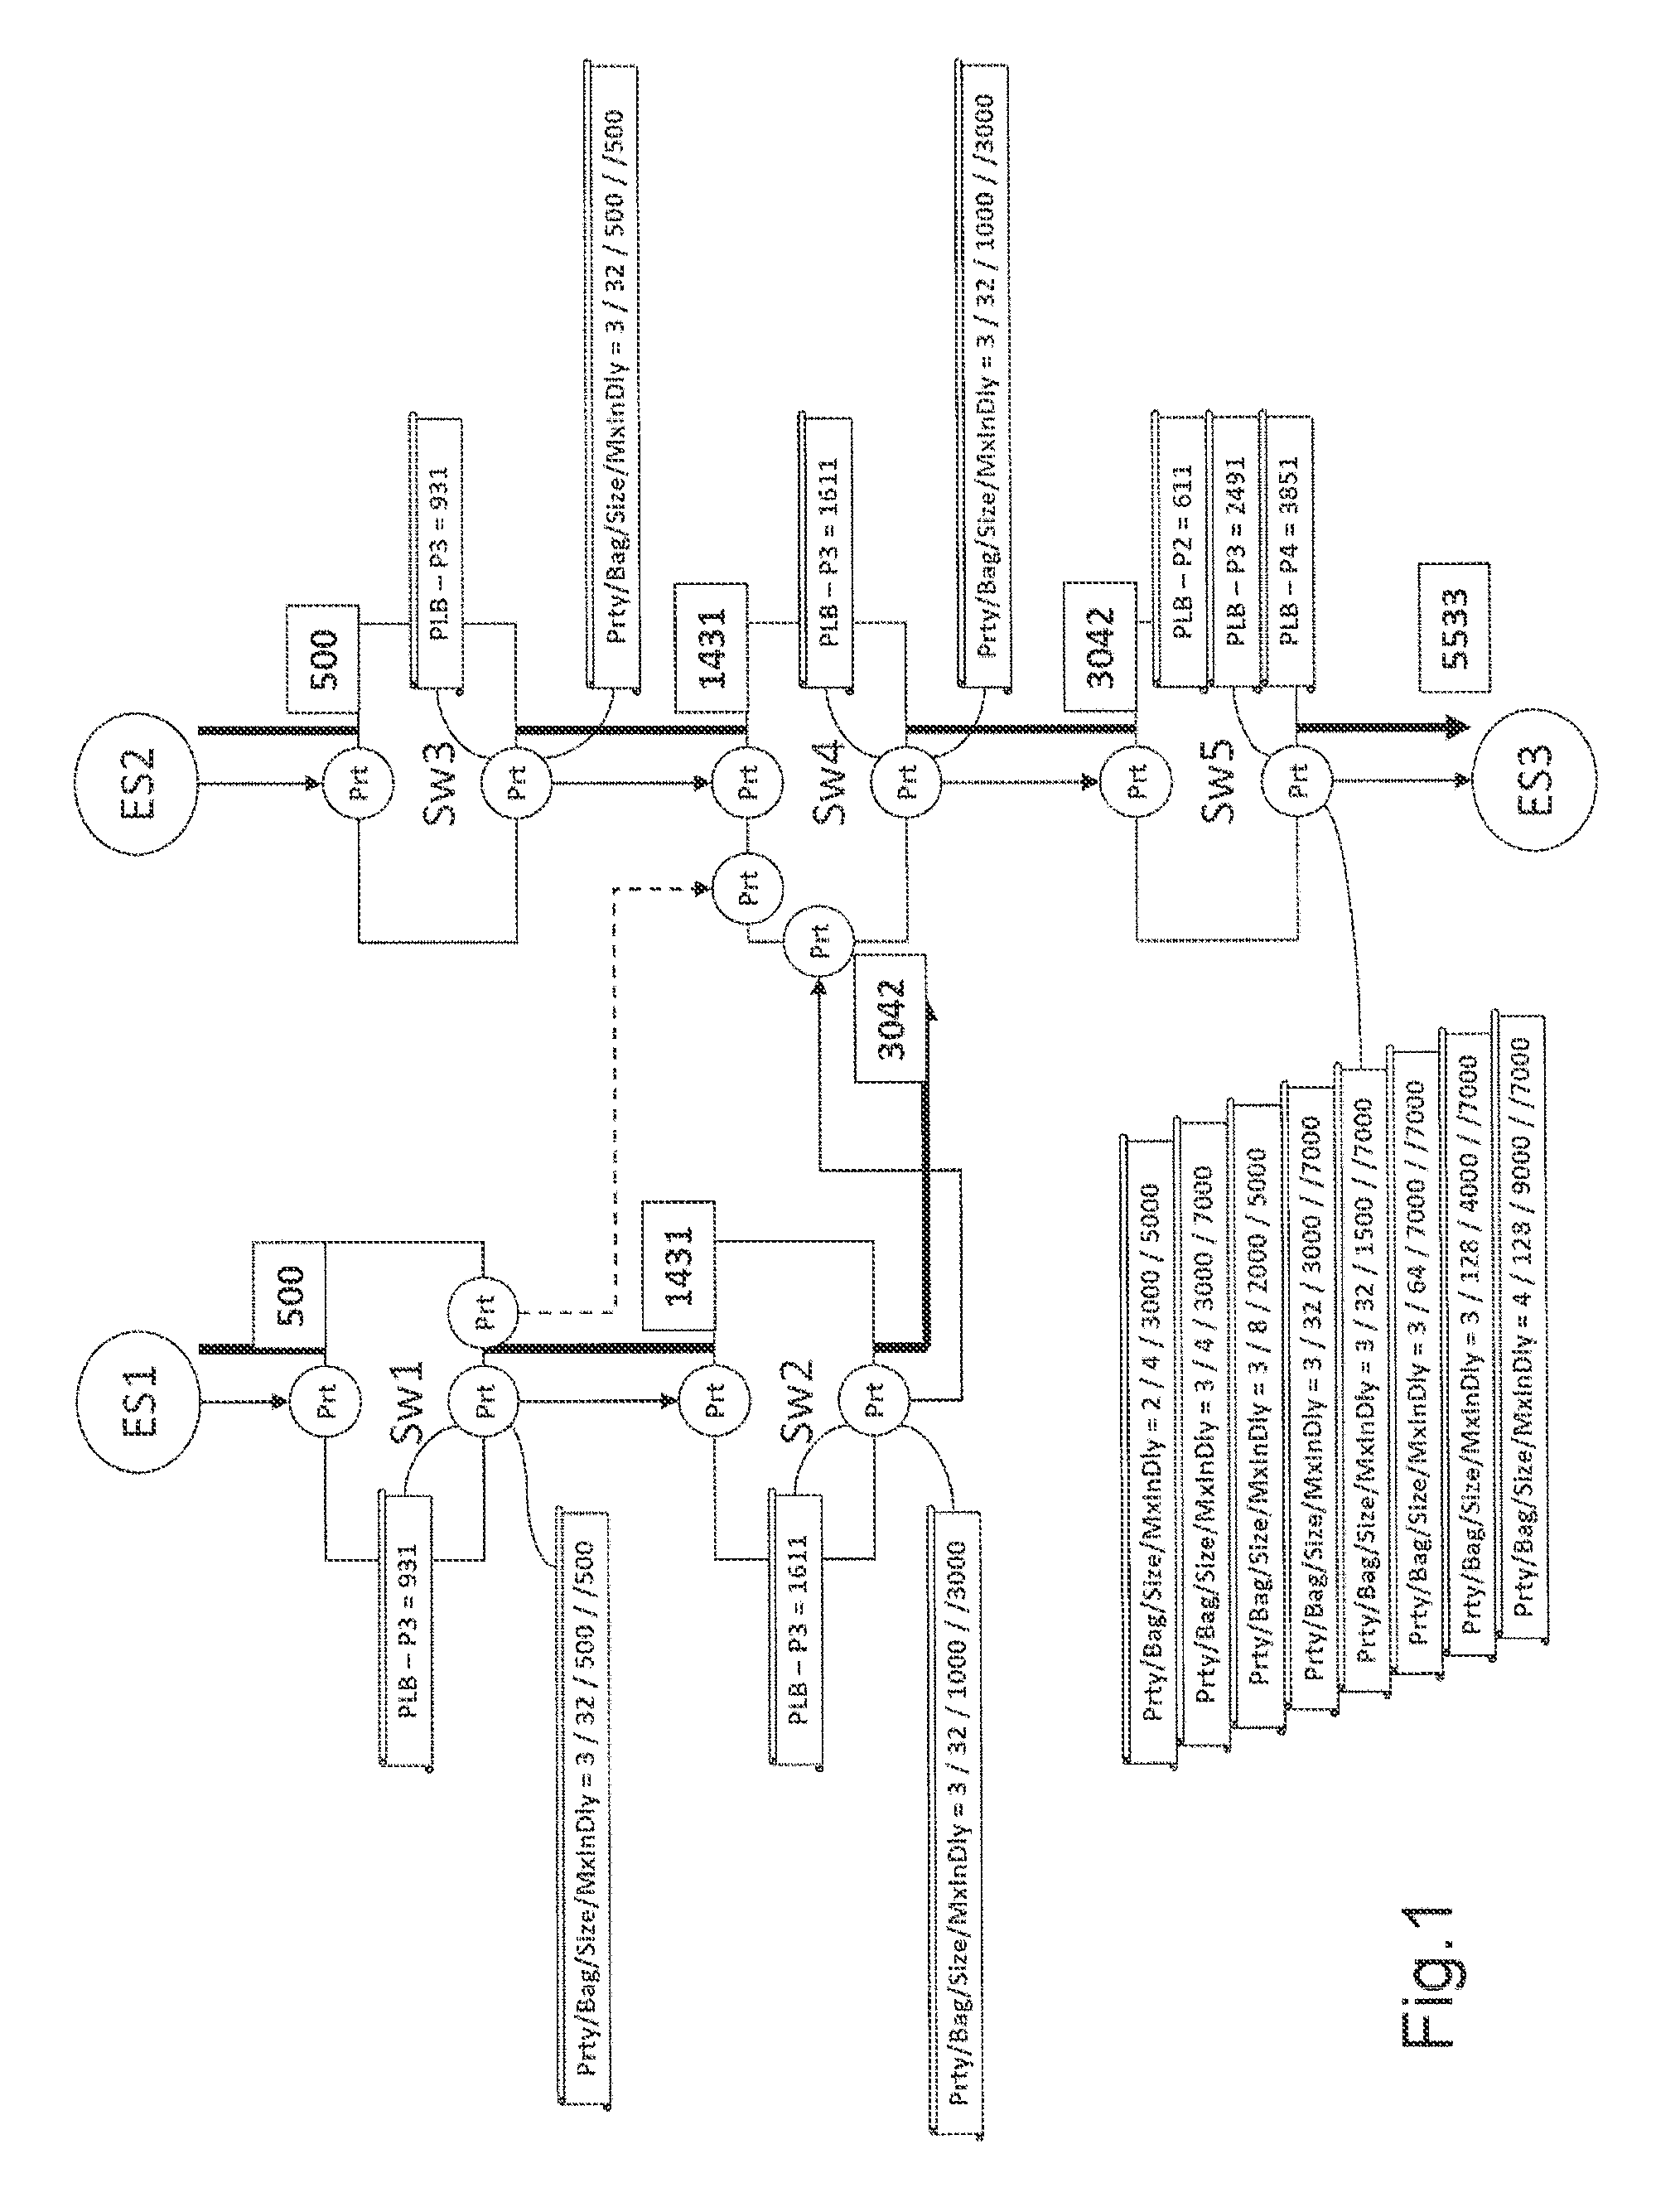 Method and device for the validation of networks